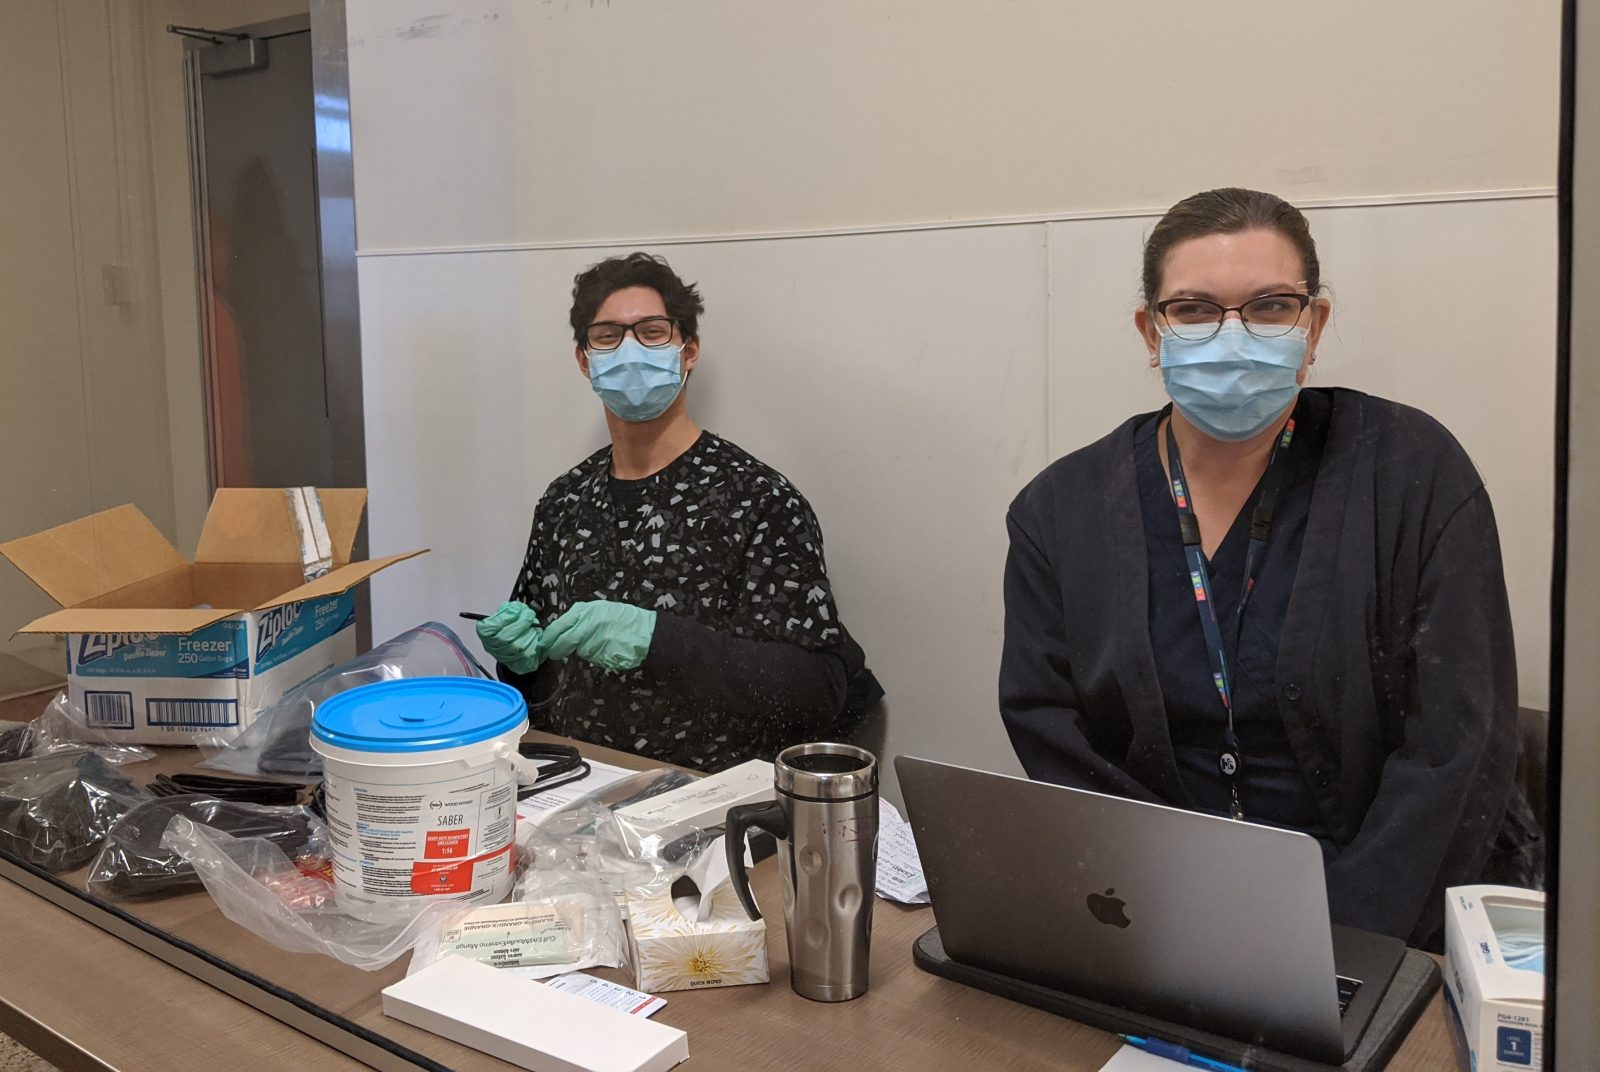 Being a healthcare worker during a pandemic